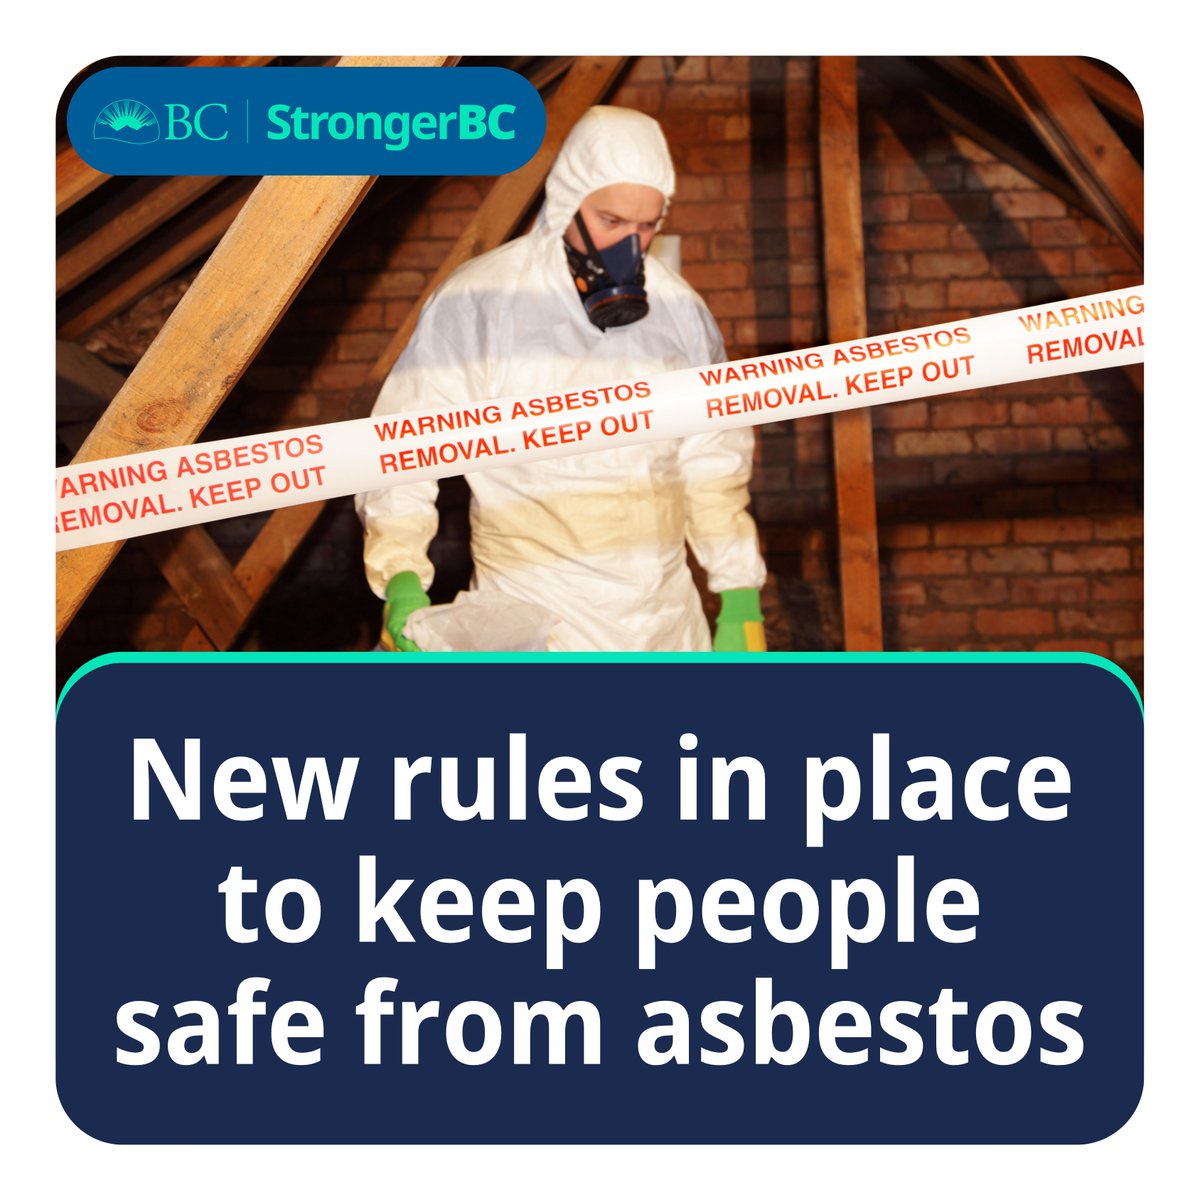 Asbestos-related diseases are the No. 1 cause of workplace-related death in BC. New rules to keep people safe are now in effect. As of Jan. 1, asbestos abatement workers must be certified in BC & employers in this area must hold a licence. WorkSafeBC.ca/Asbestos @WorkSafeBC